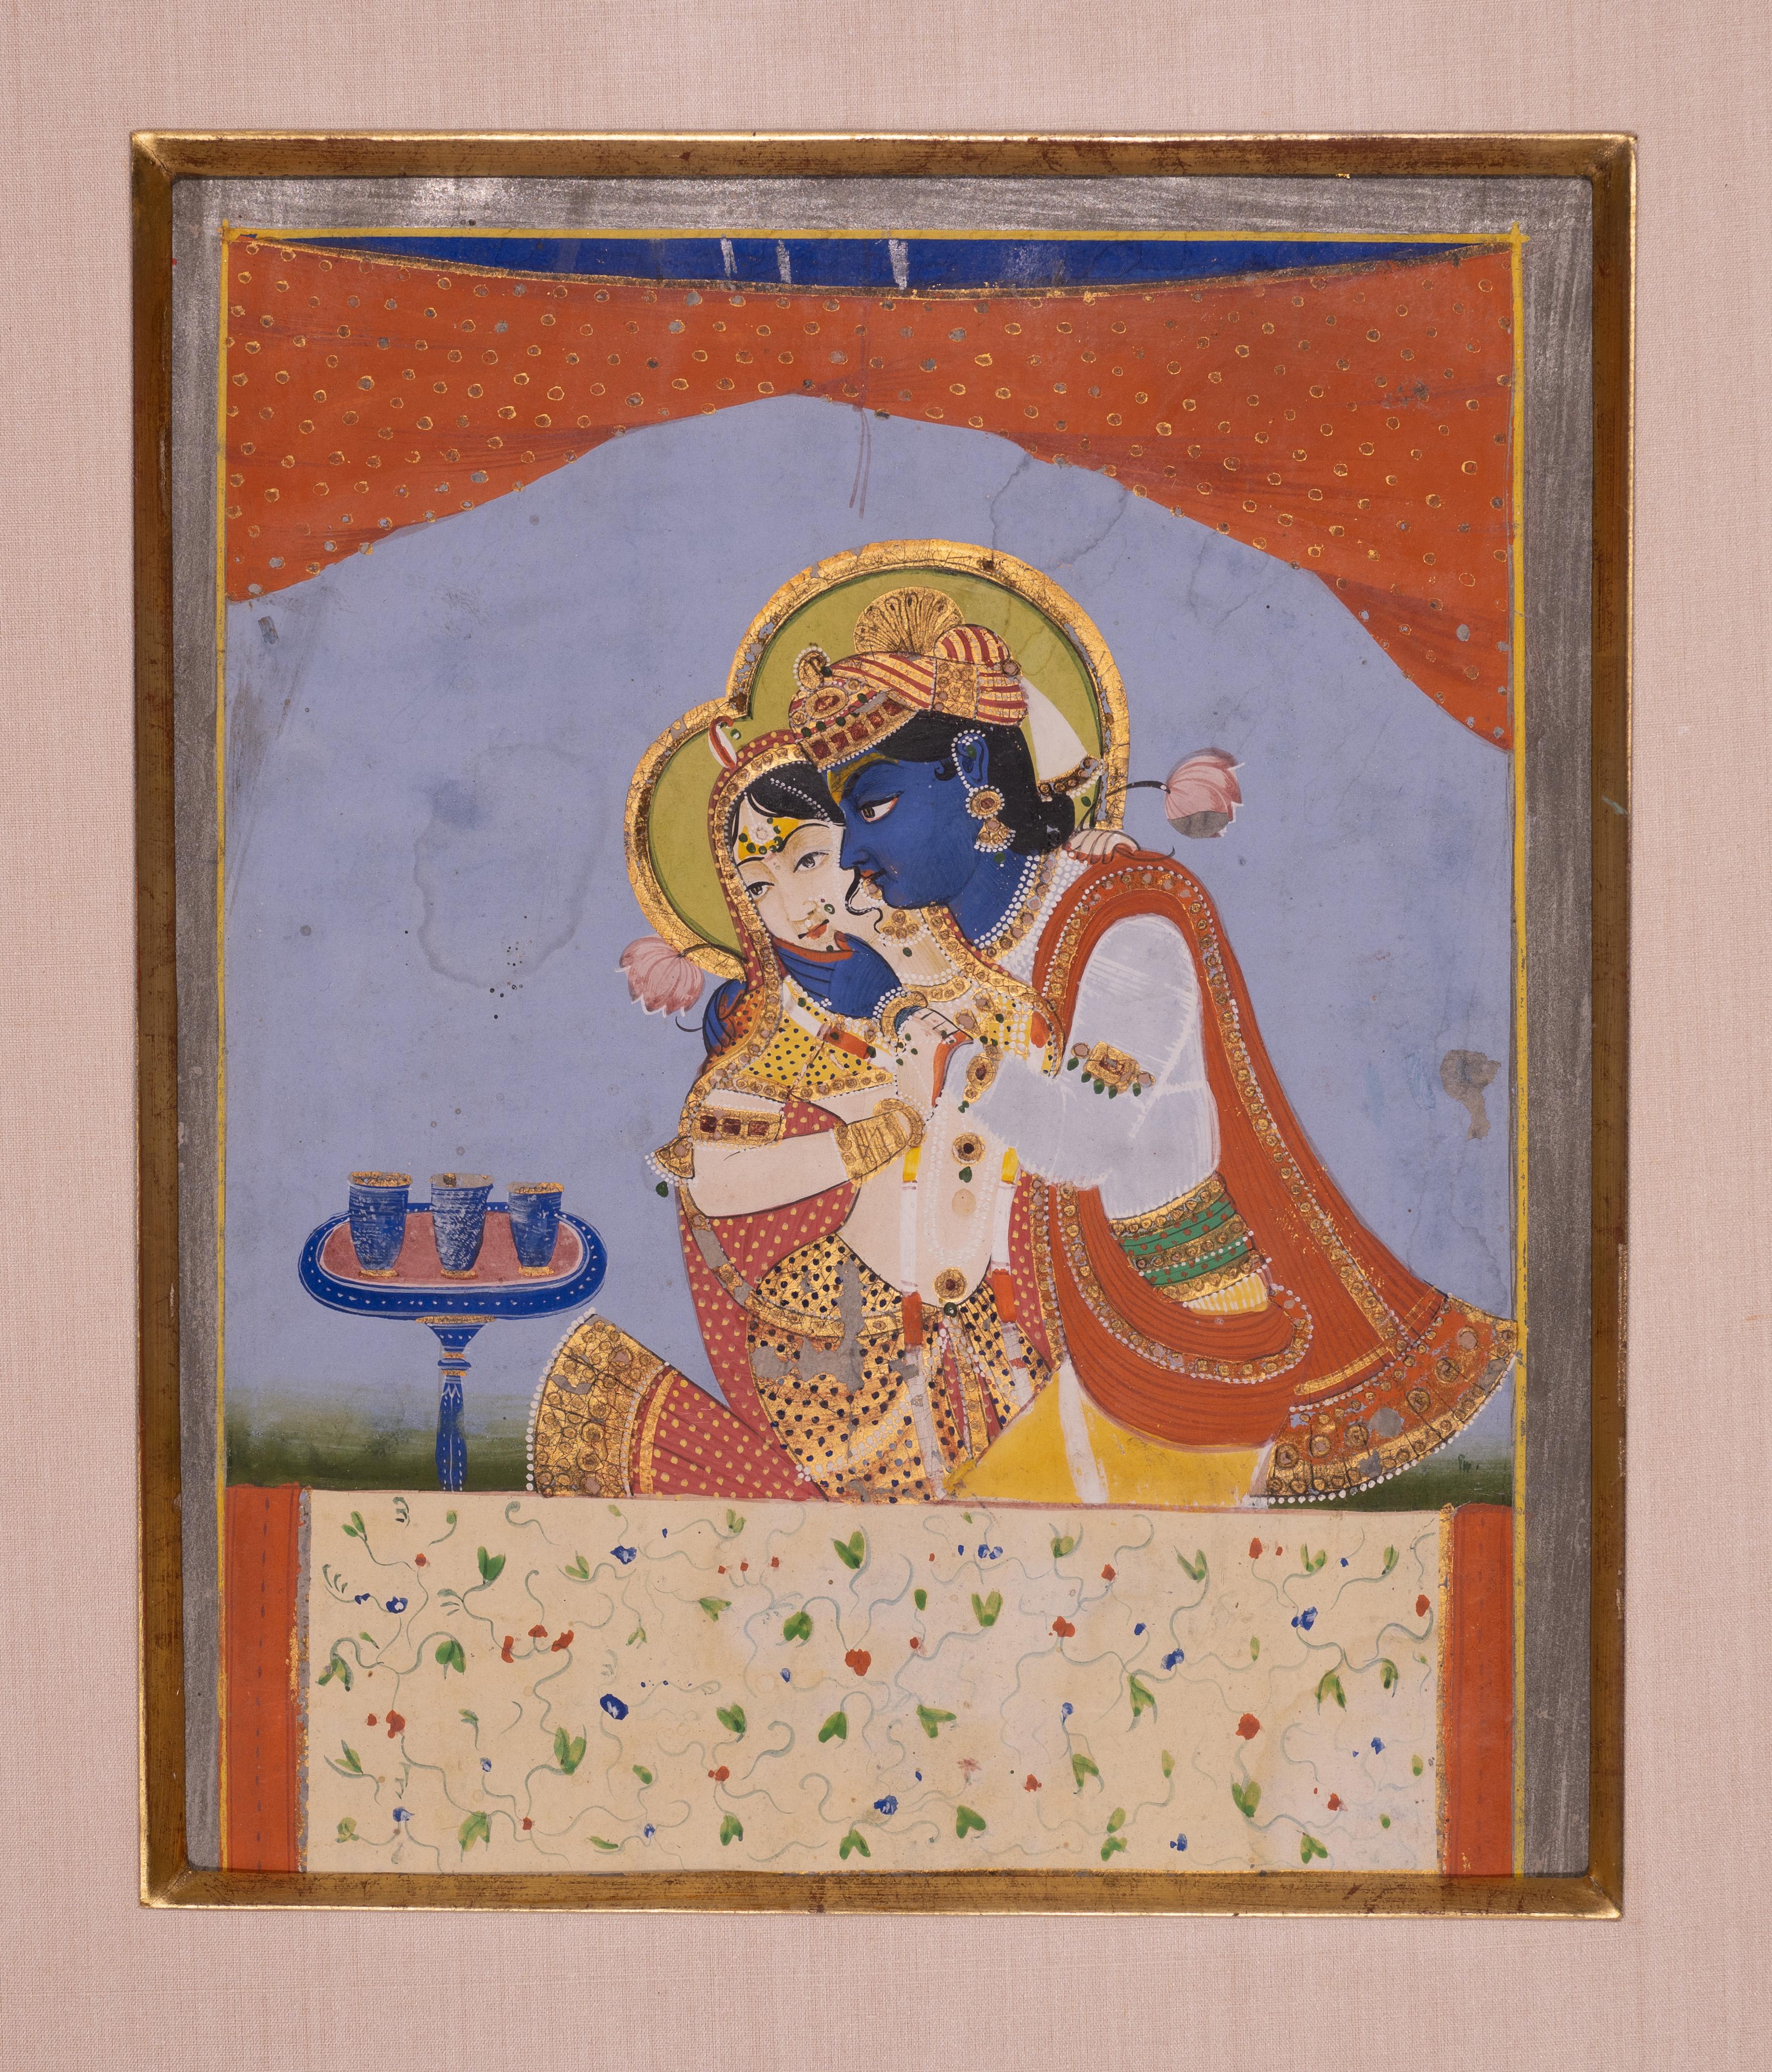 A charming painting of Lord Krishna and his paramour Radha painted in mineral pigments (gouache) with gold and silver highlights circa mid 19th century in Jaipur style of painting.

Krishna was a god (an incarnation of god Vishnu) who accomplished